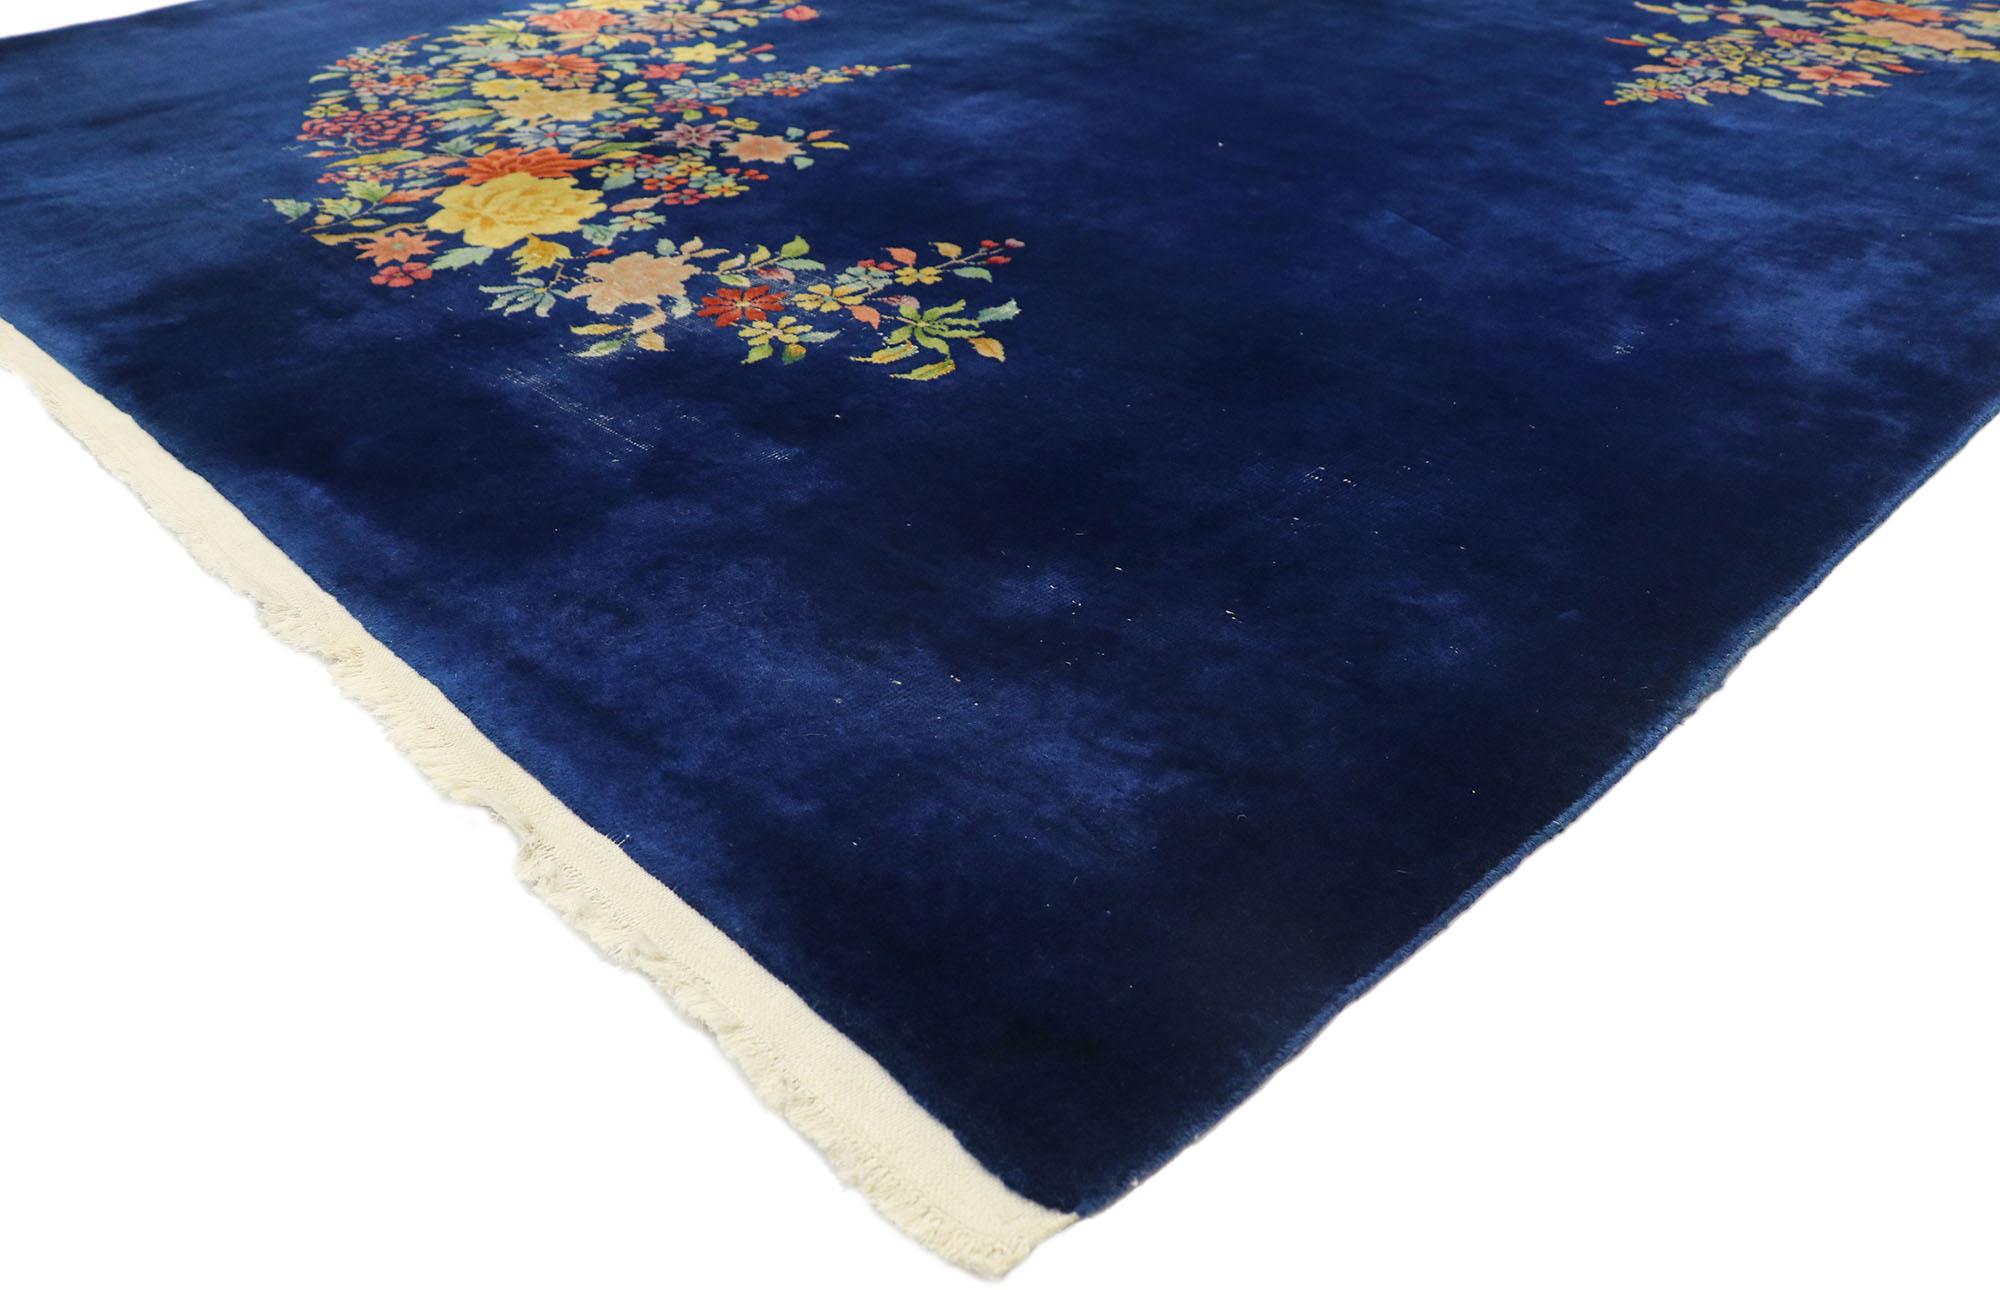 77406, antique Chinese Art Deco rug with Jazz Age Style Inspired by Walter Nichols 08'09 x 11'07. Drawing inspiration from Walter Nichols, this hand knotted wool antique Chinese Art Deco rug displays a sense of splendor and vitality than cannot be